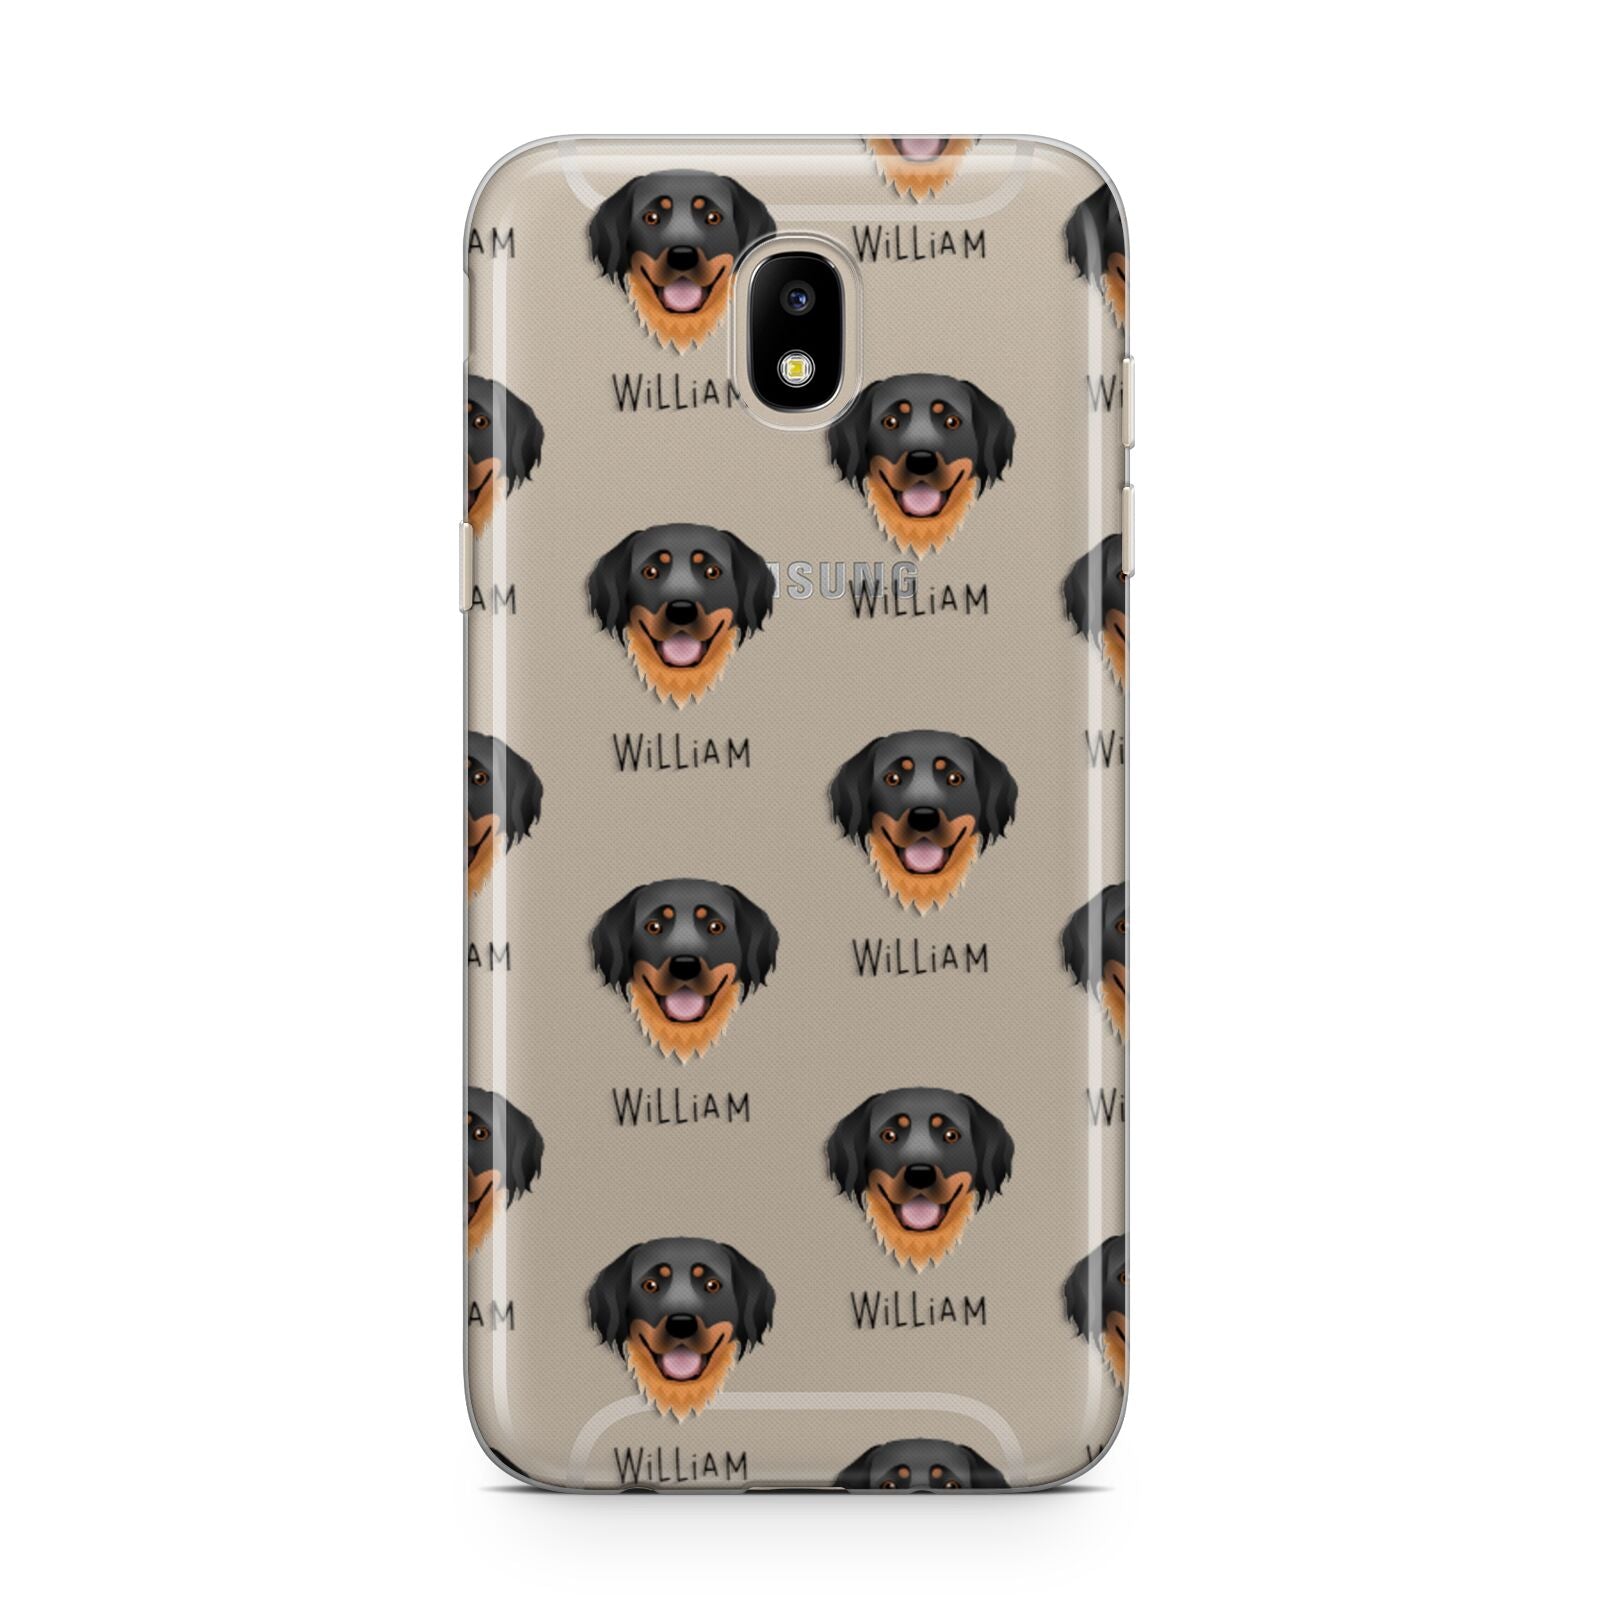 Hovawart Icon with Name Samsung J5 2017 Case